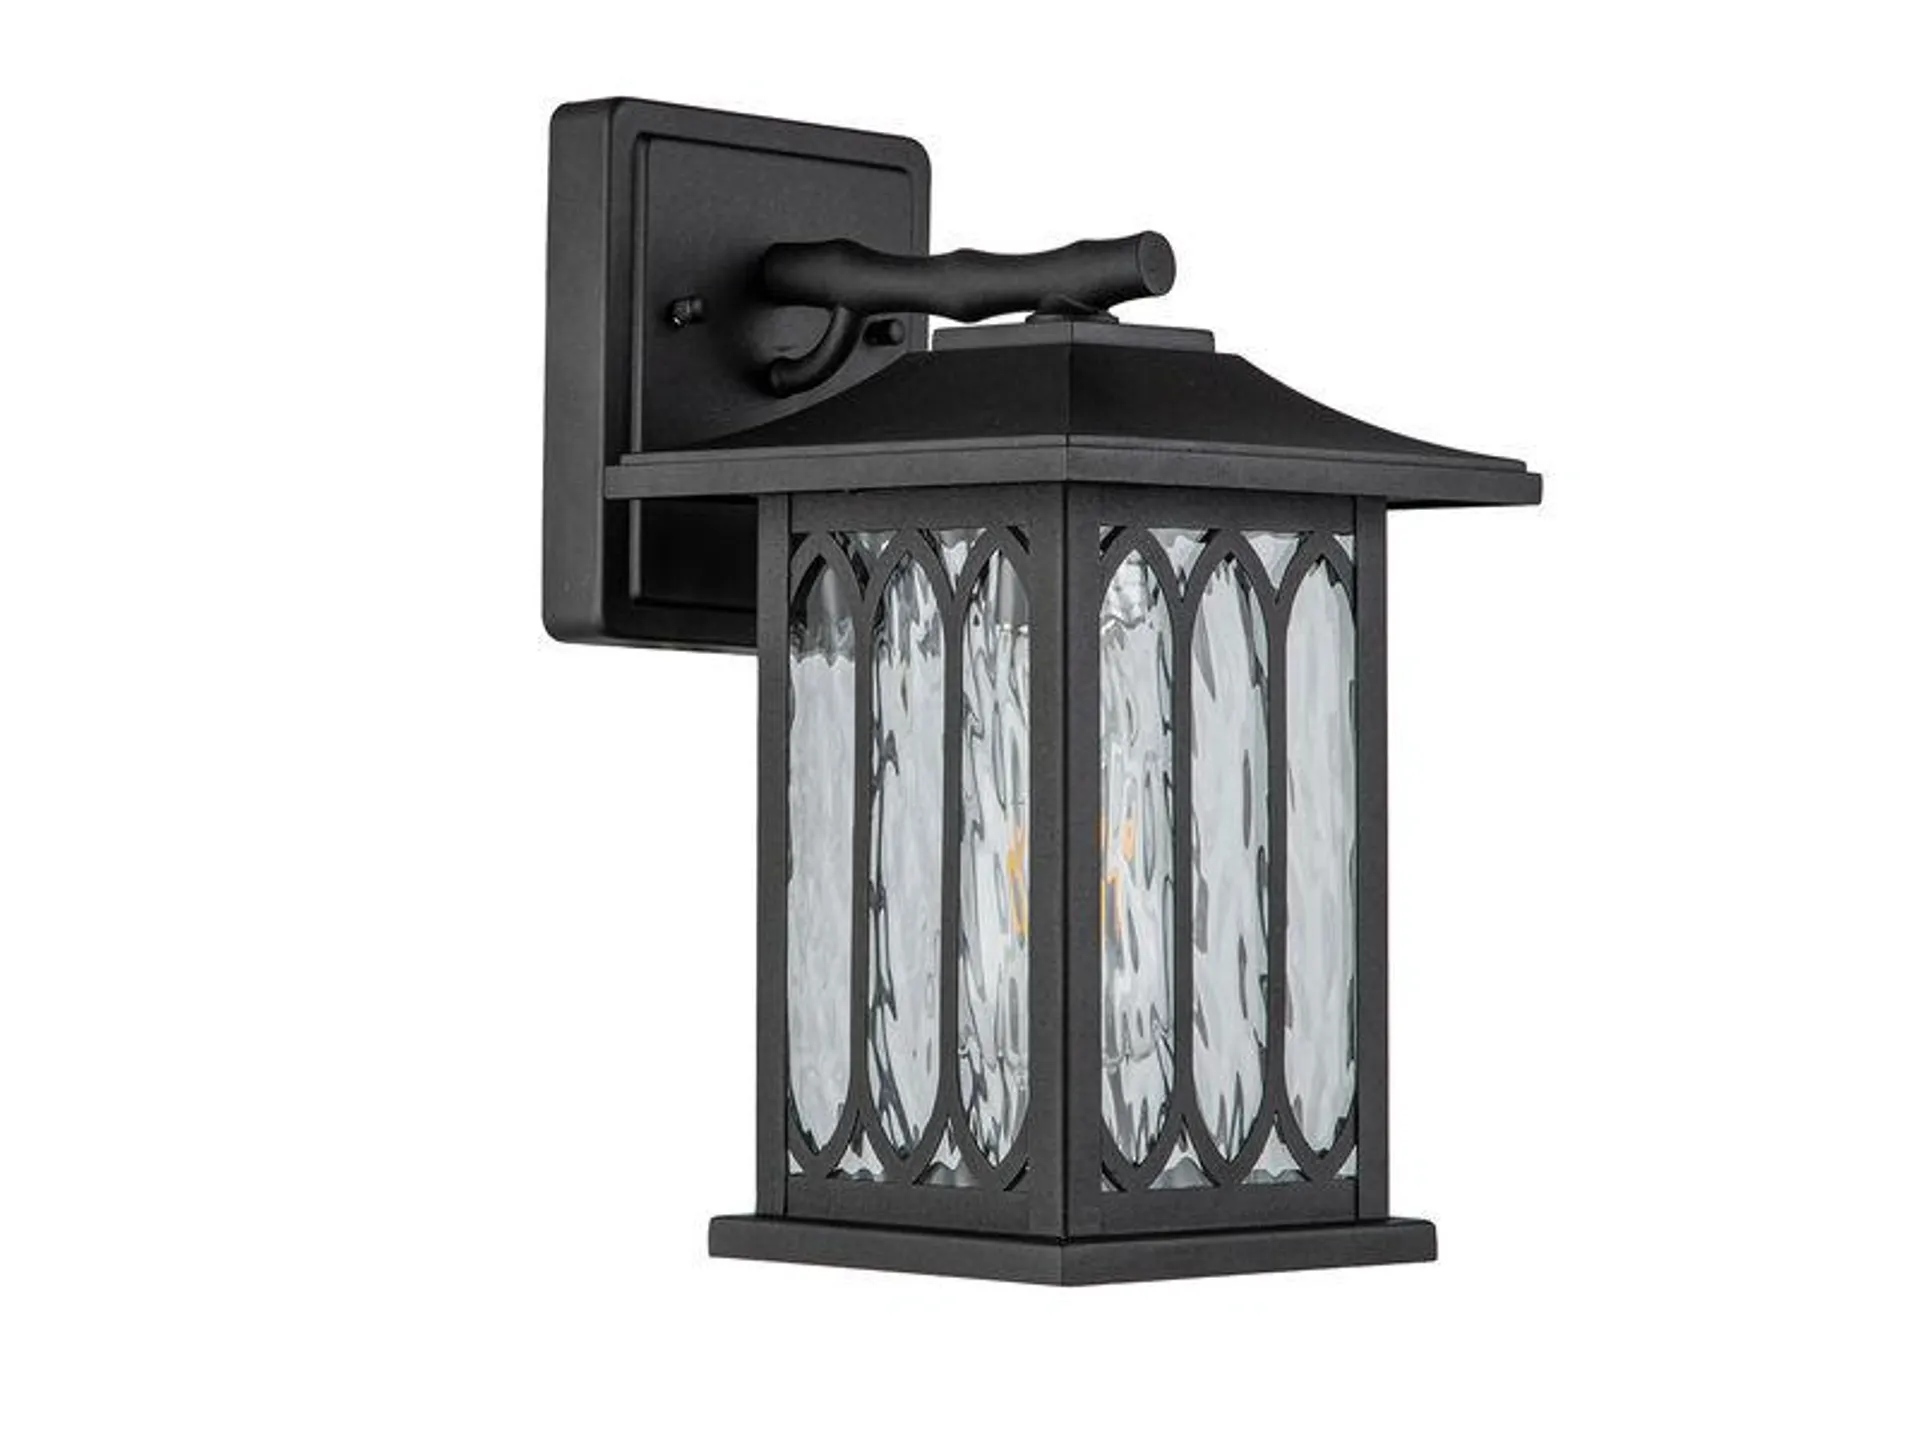 Windfall Black Outdoor Hardwired Wall Lantern Sconce with No Bulbs Included